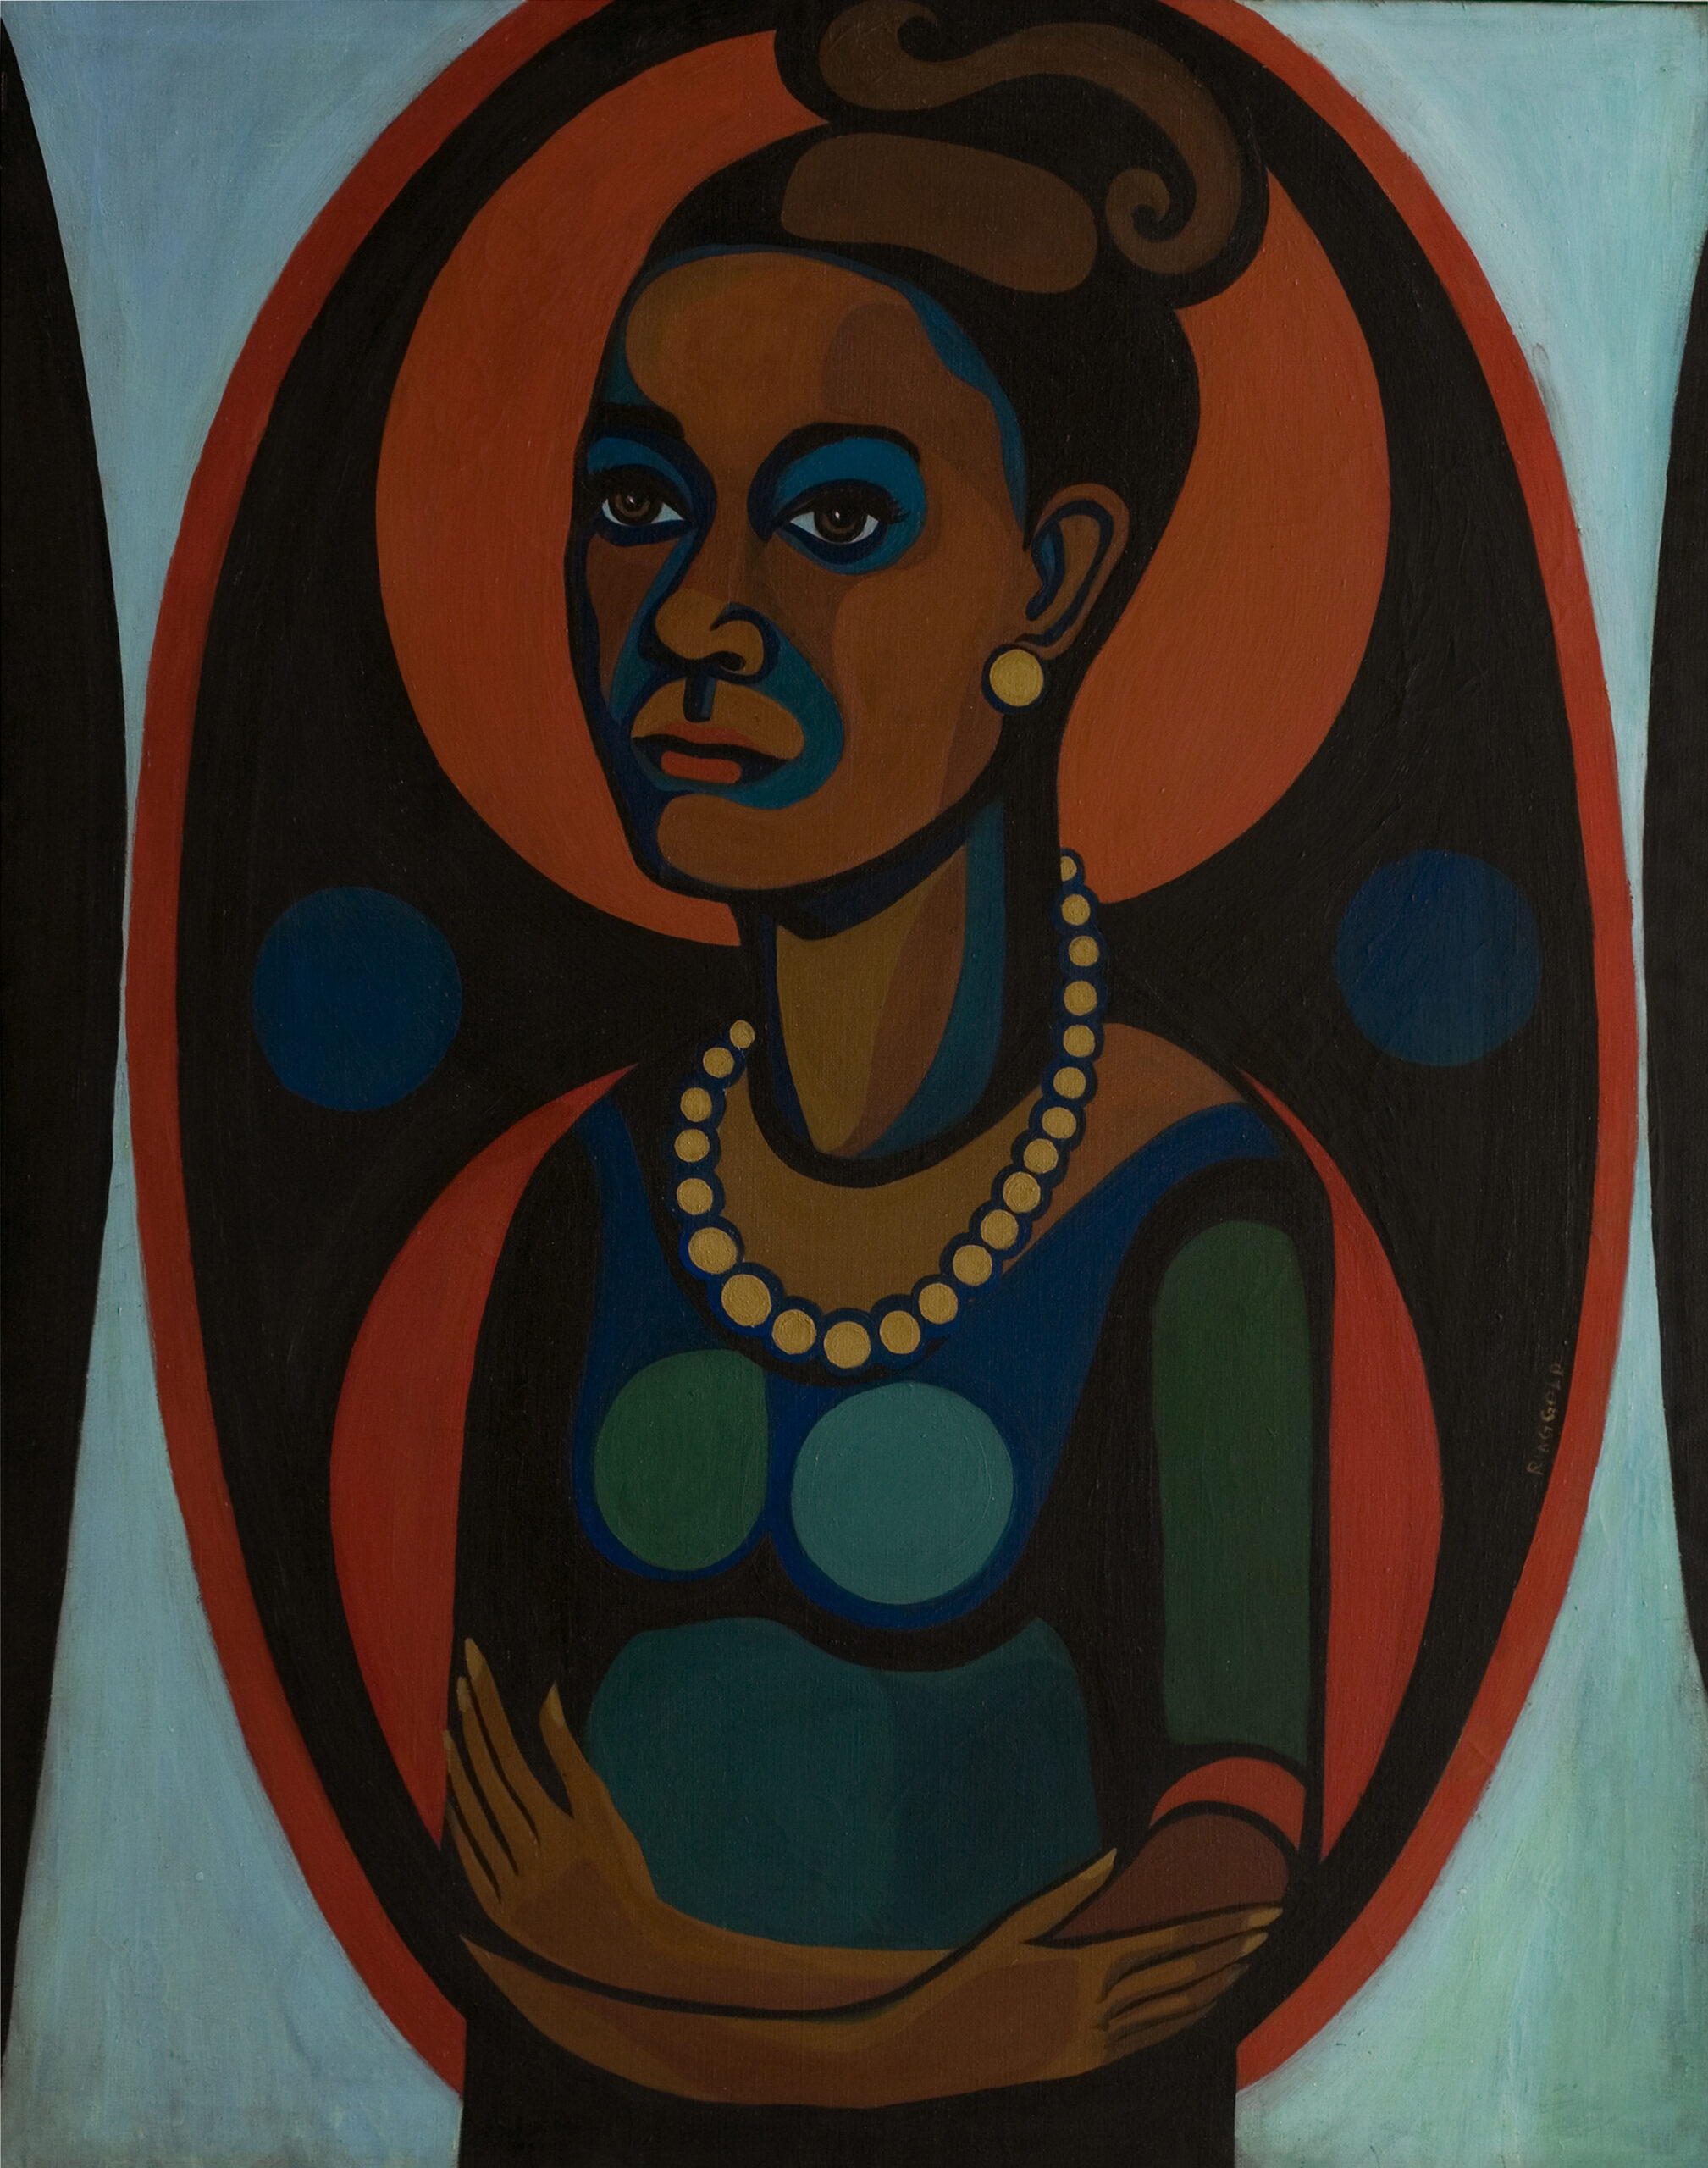 Modernist portrait of a dark-skinned woman with her hair styled in a 1960's updo, wearing pearl earrings and a pearl necklace. In a style akin to Cubism, solid-colored shapes in browns, blues, black and orange, are arranged to create the overall image.